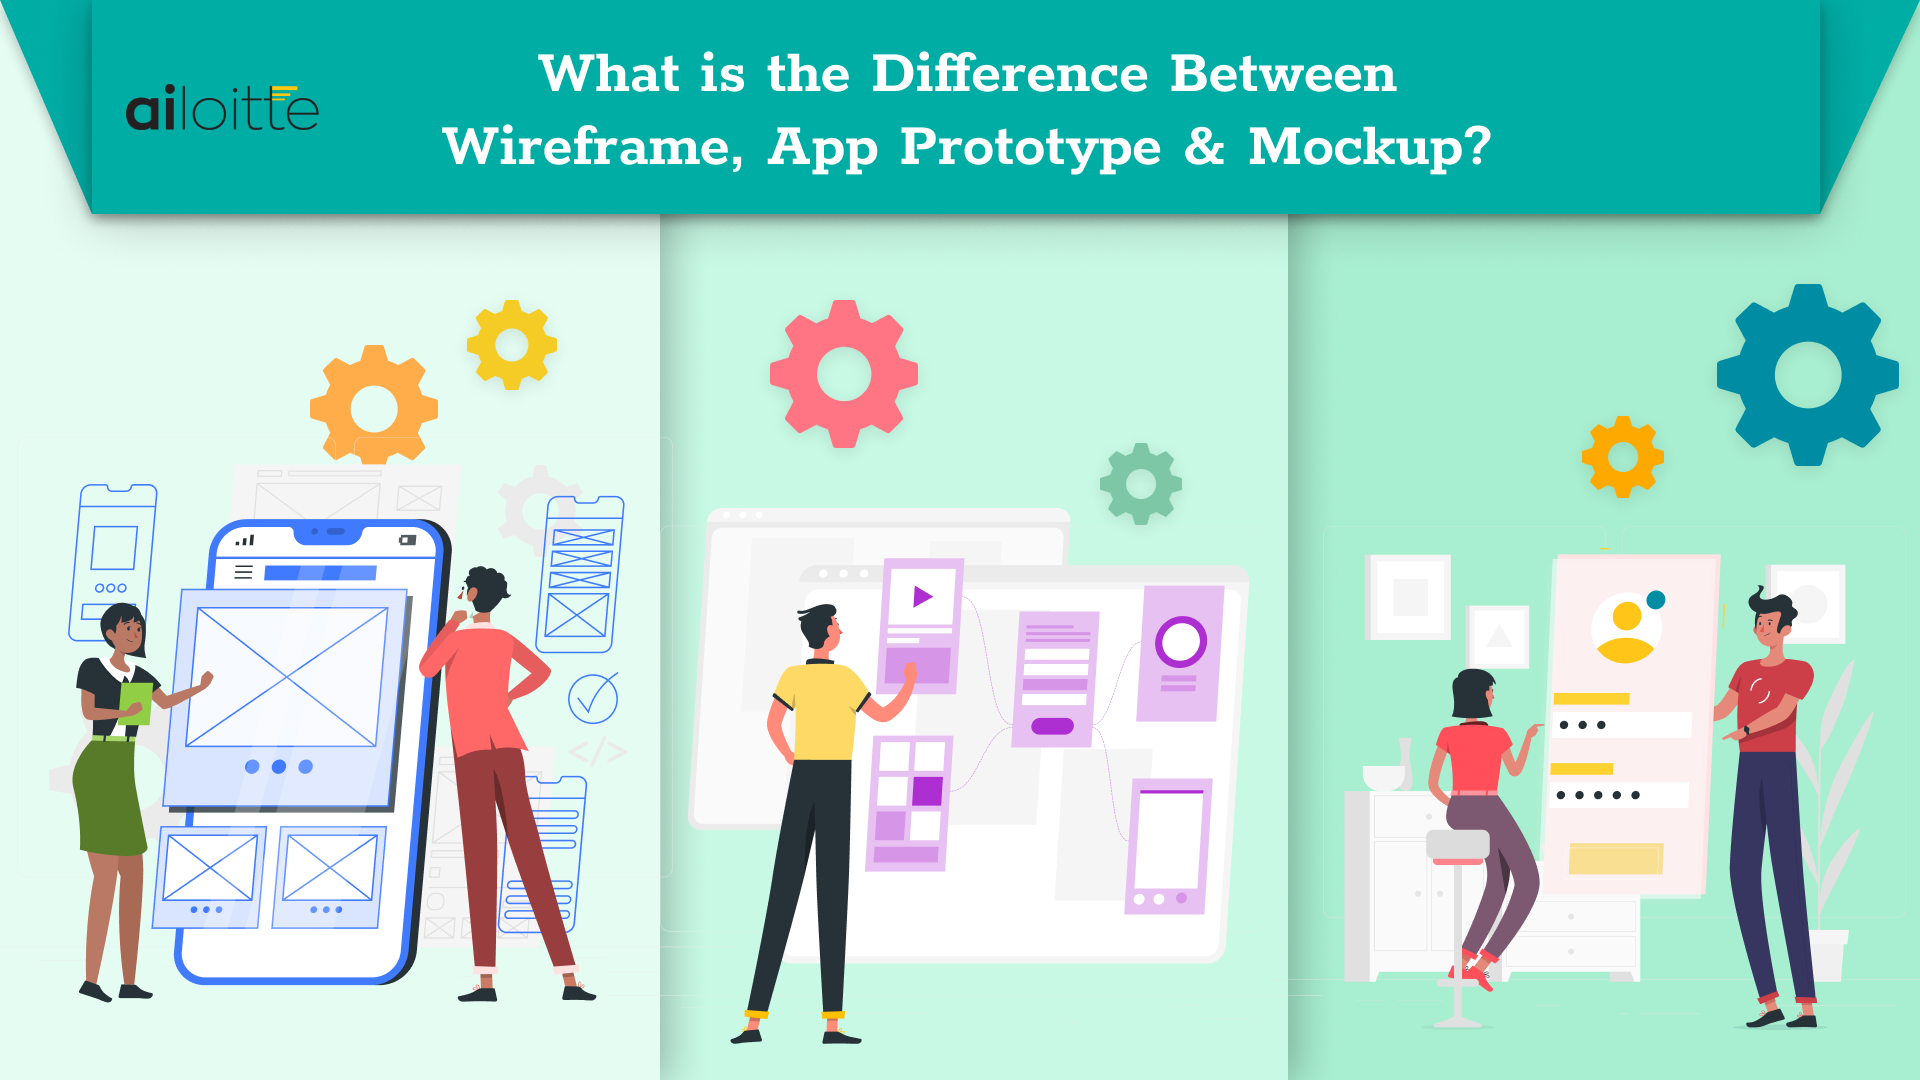 Wireframe vs Mockup vs Prototype: What are the Differences?